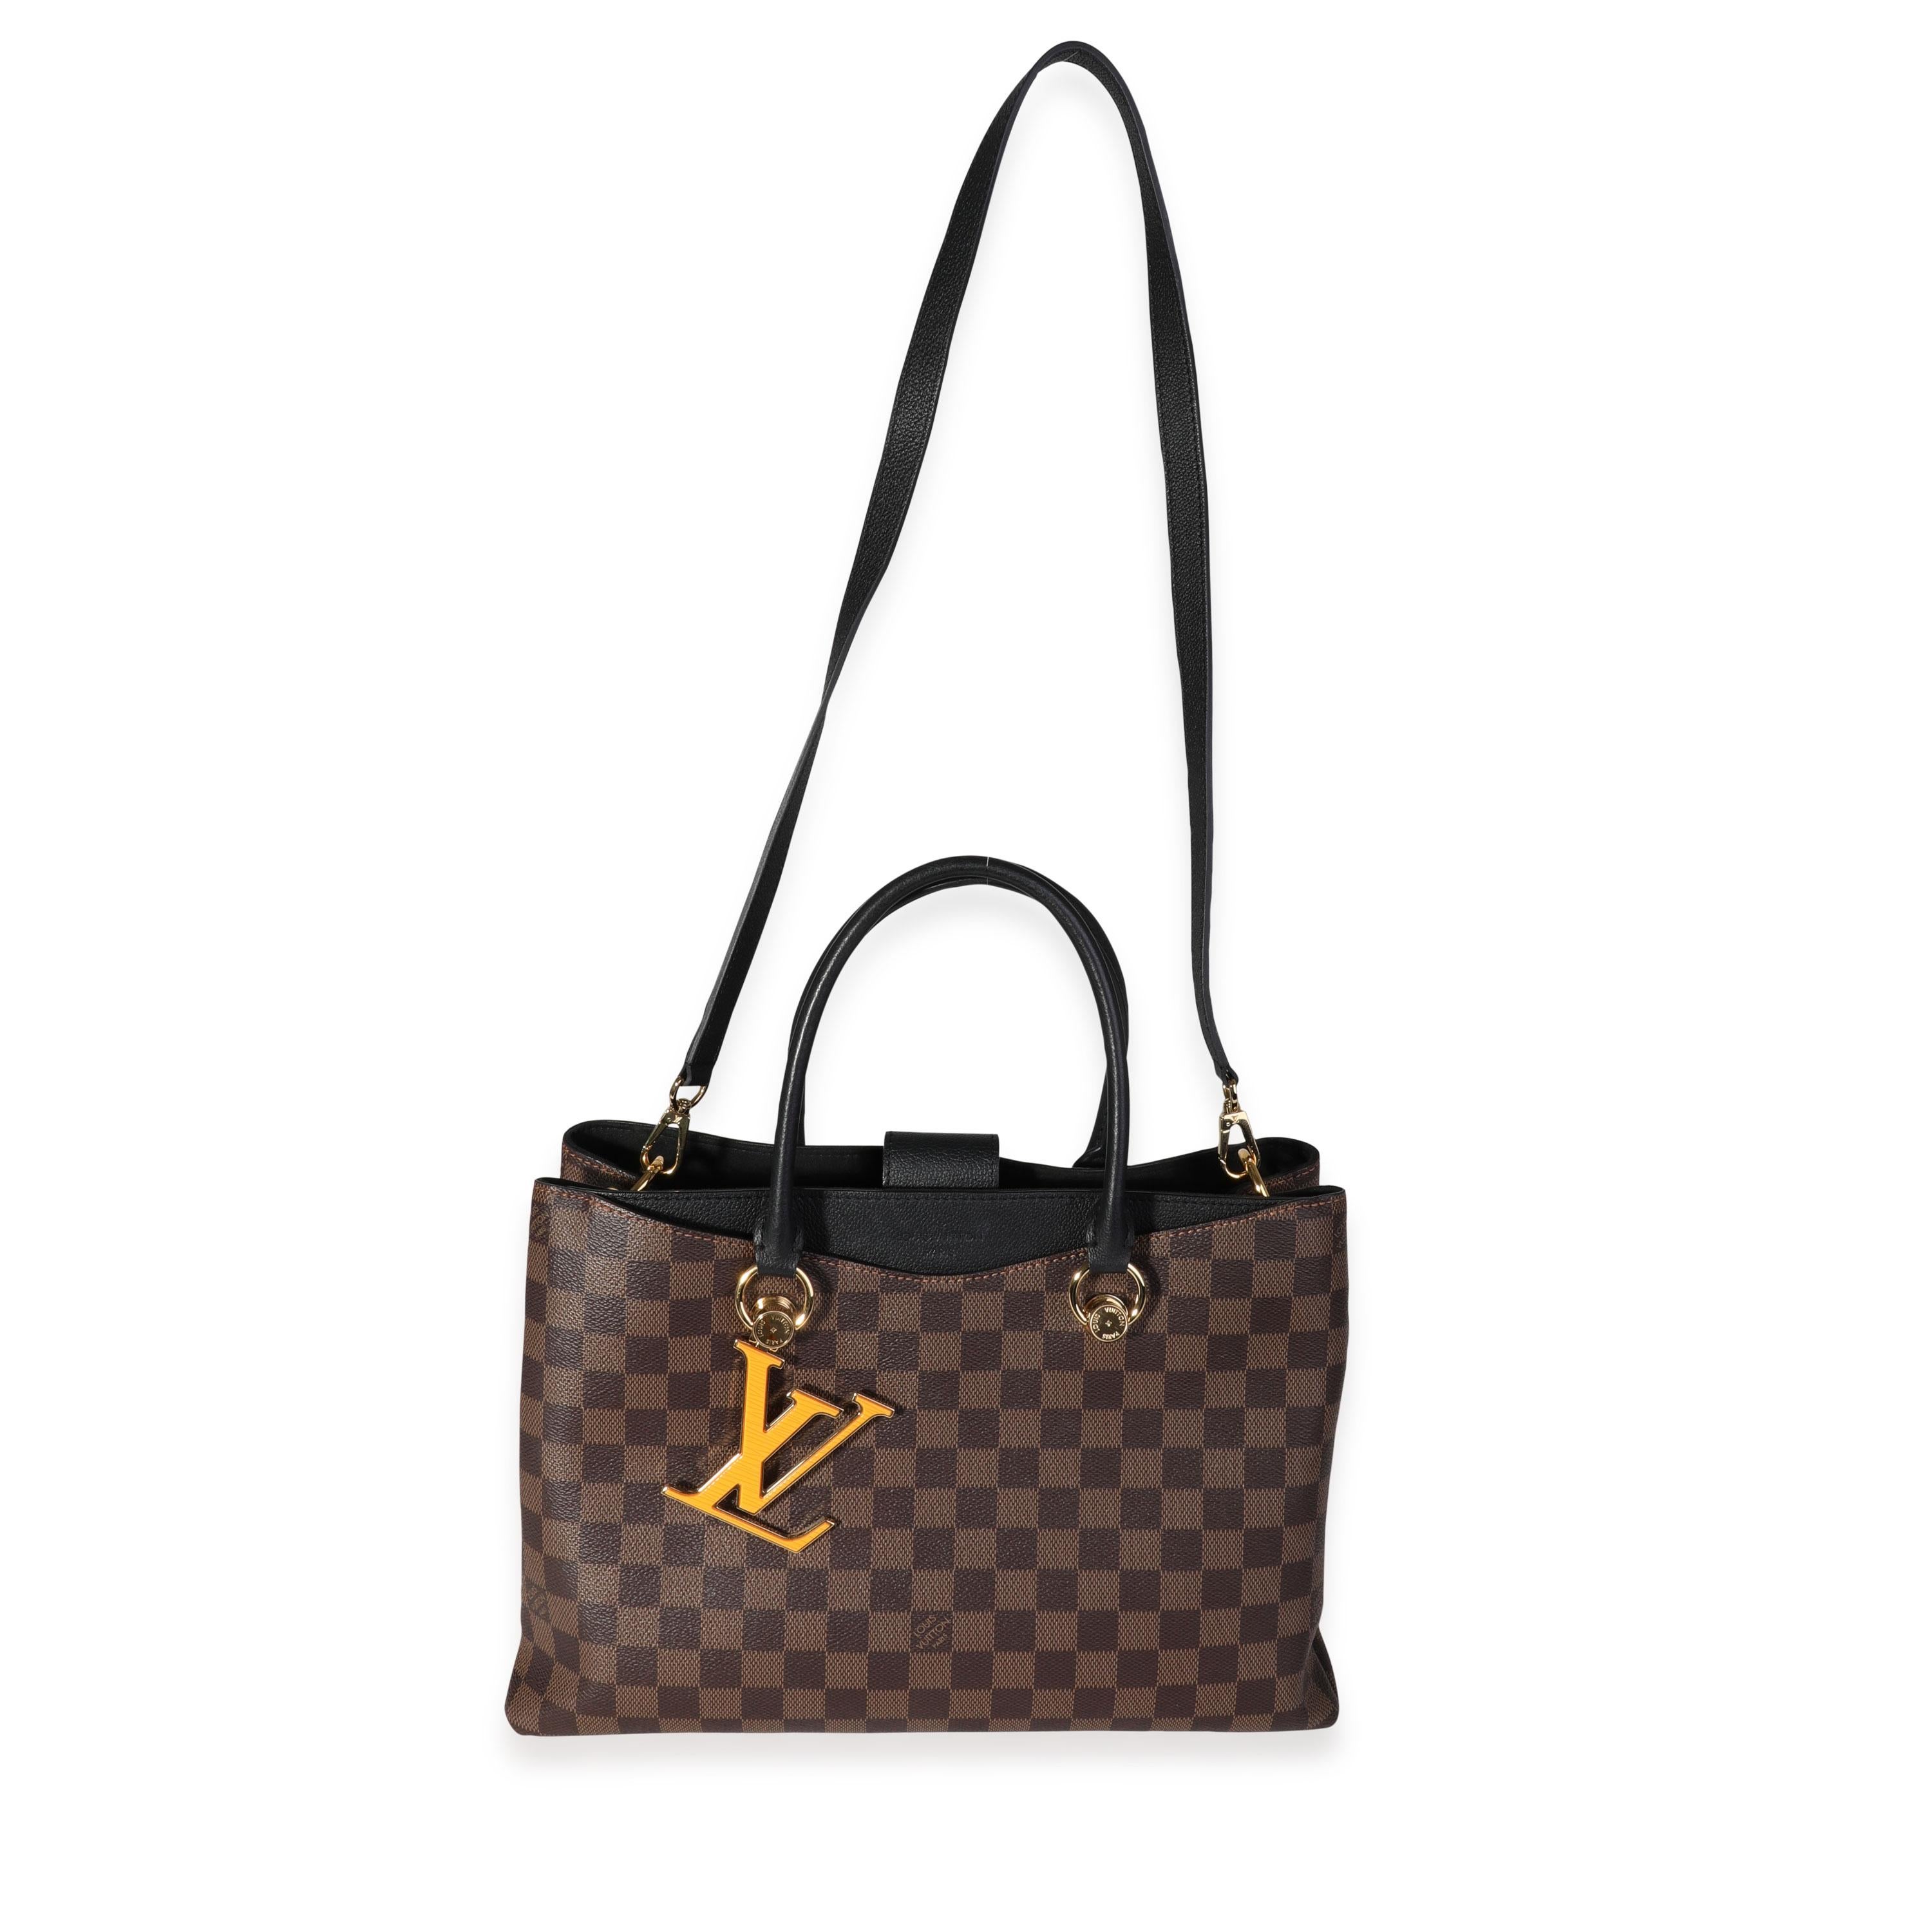 Listing Title: Louis Vuitton Damier Ebene & Black Calfskin LV Riverside
SKU: 118512
MSRP: 2800.00
Condition: Pre-owned (3000)
Handbag Condition: Very Good
Condition Comments: Feet scratched. Interior shows signs of use.
Brand: Louis Vuitton
Model: